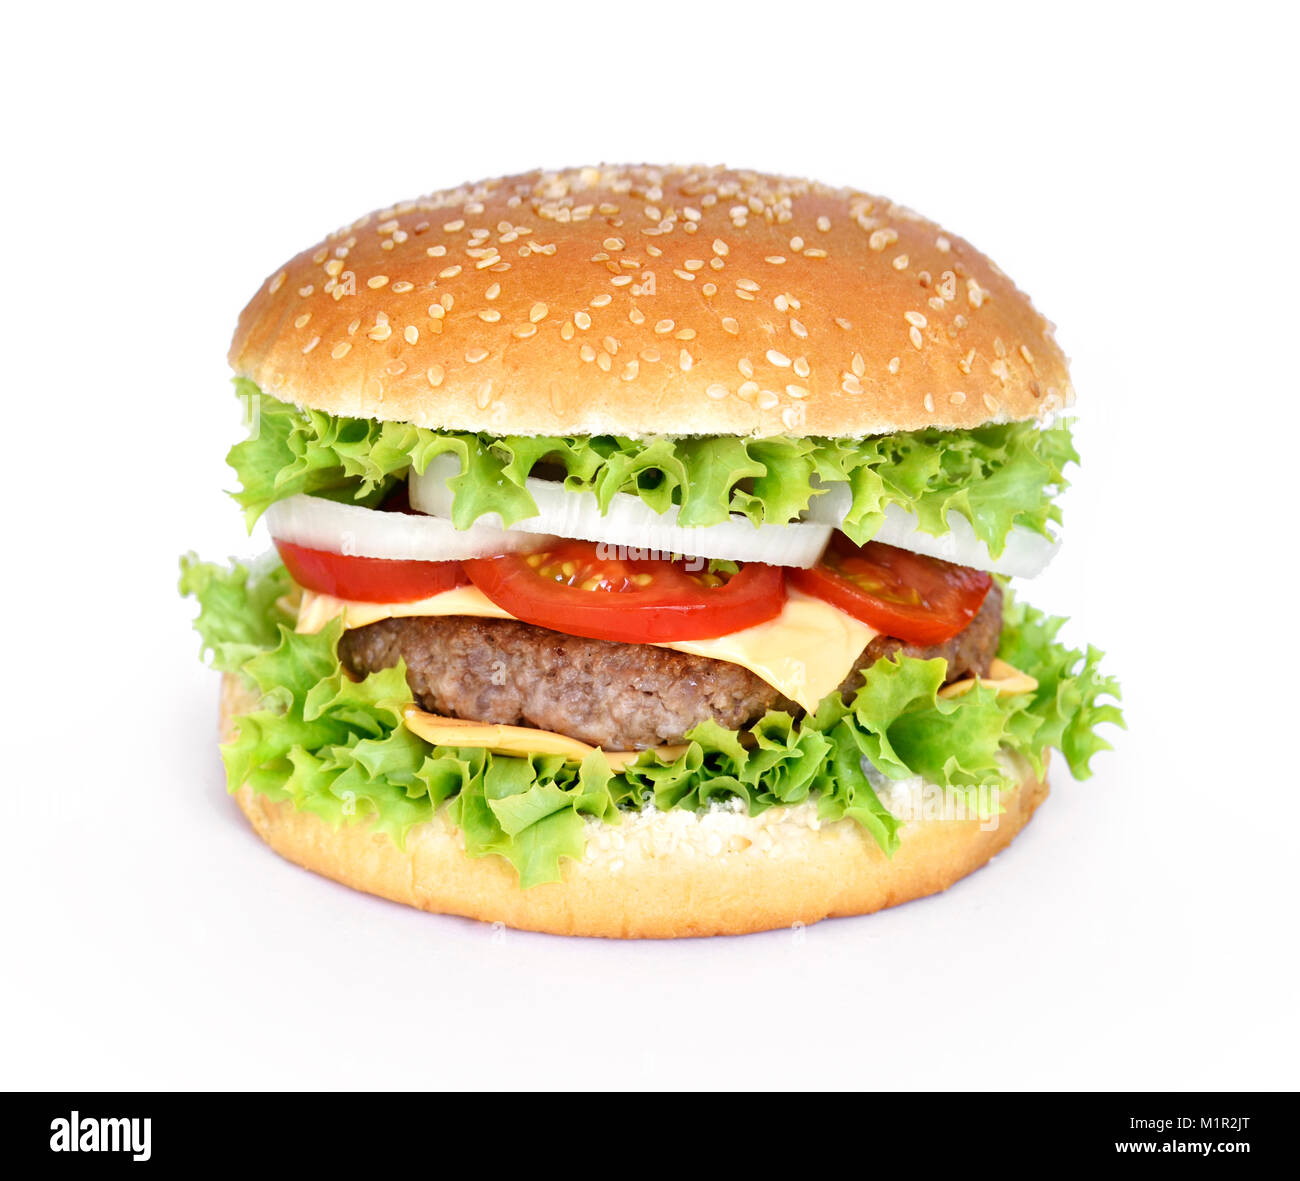 Delicious burger, hamburger or cheeseburger with fresh salad, tomatoes and onions. Gourmet burger with beef patty, isolated on white background. Stock Photo